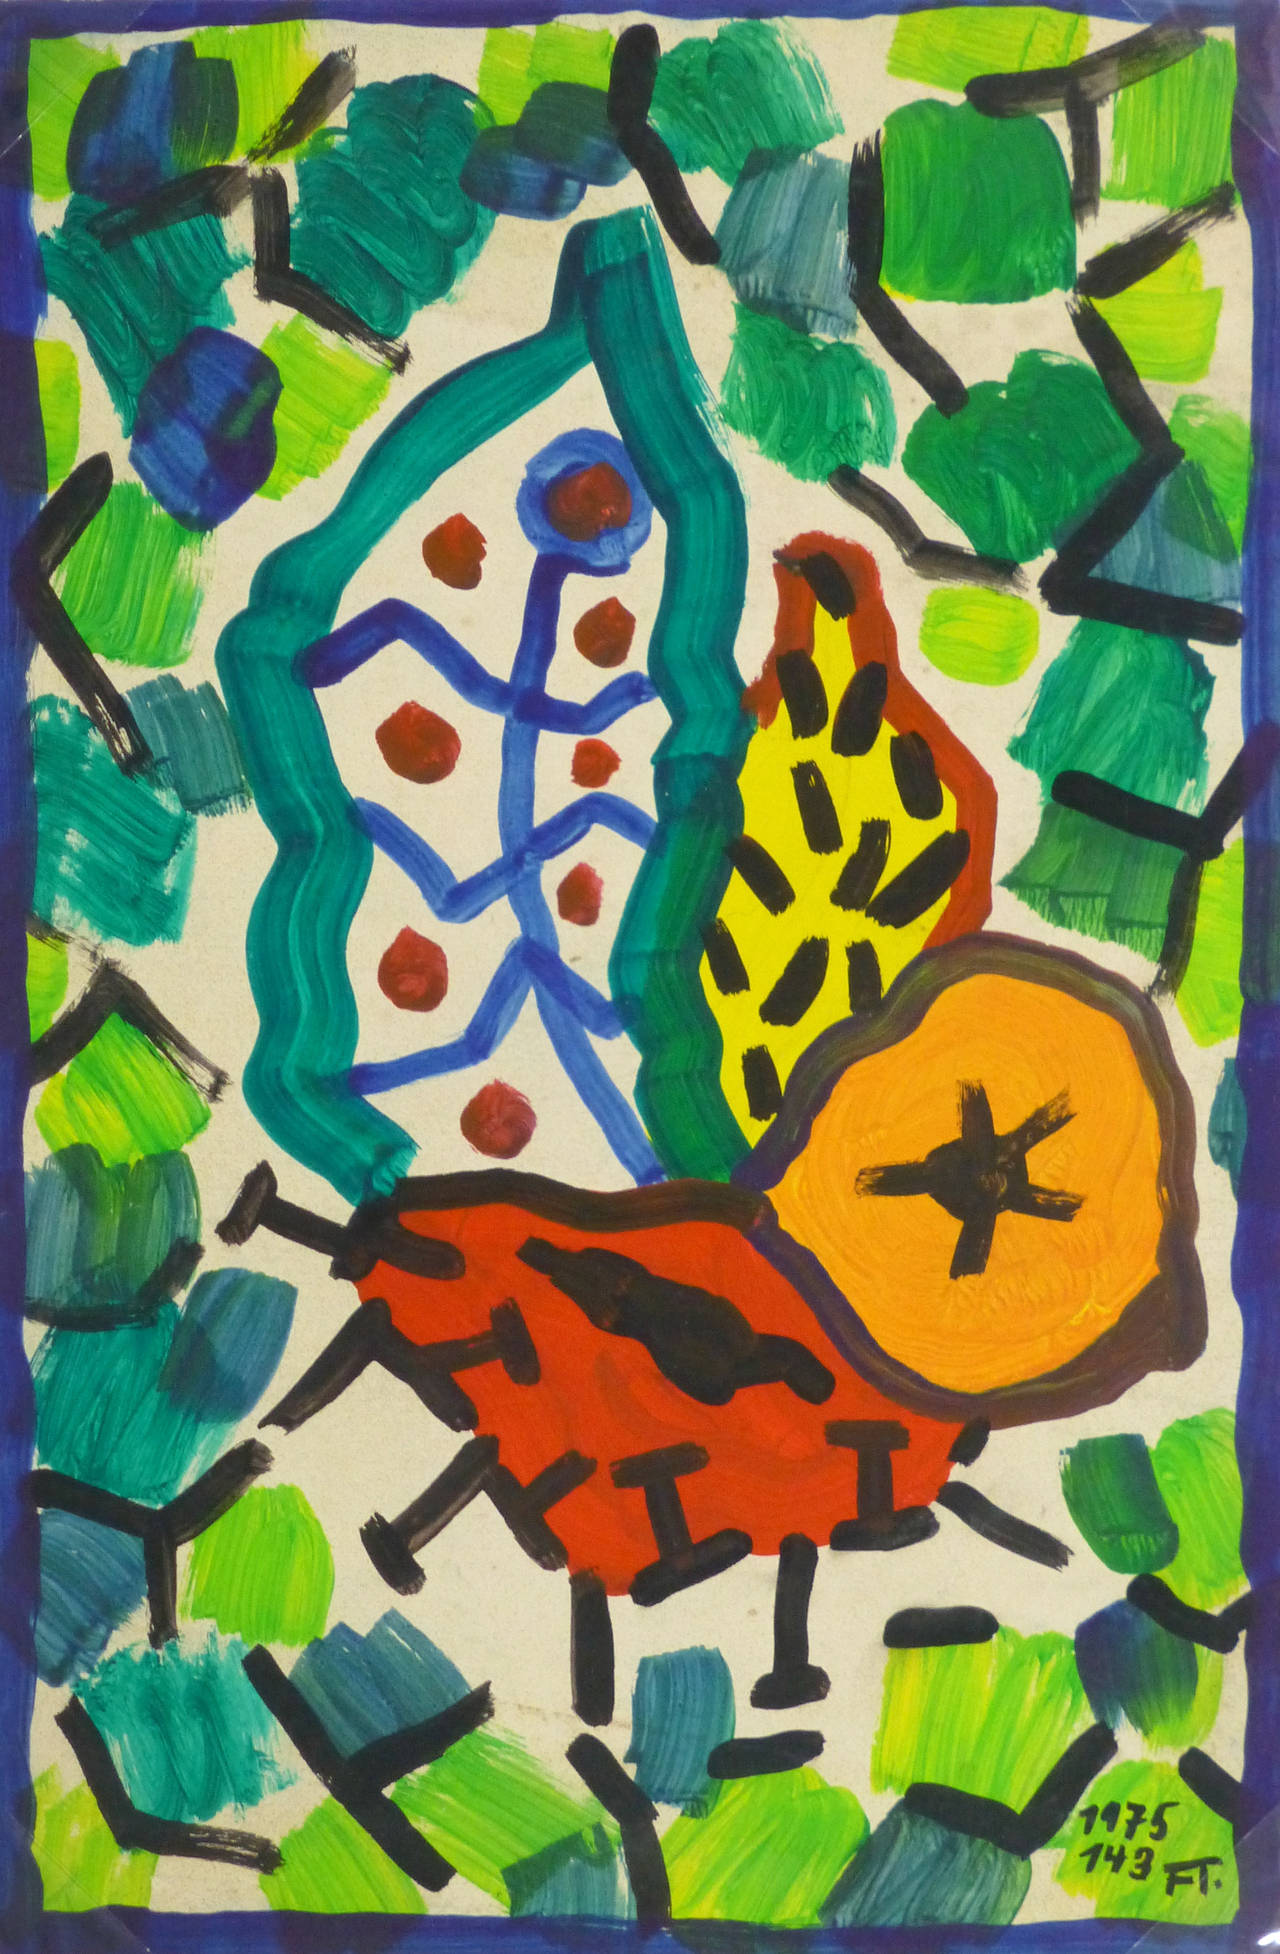 Fun and festive abstract acrylic painting of bright fruit and foliage against a vivid backdrop of green and black shapes by FT, 1975. Signed and dated lower right.

Original one-of-a-kind artwork on paper displayed on a white mat with a gold